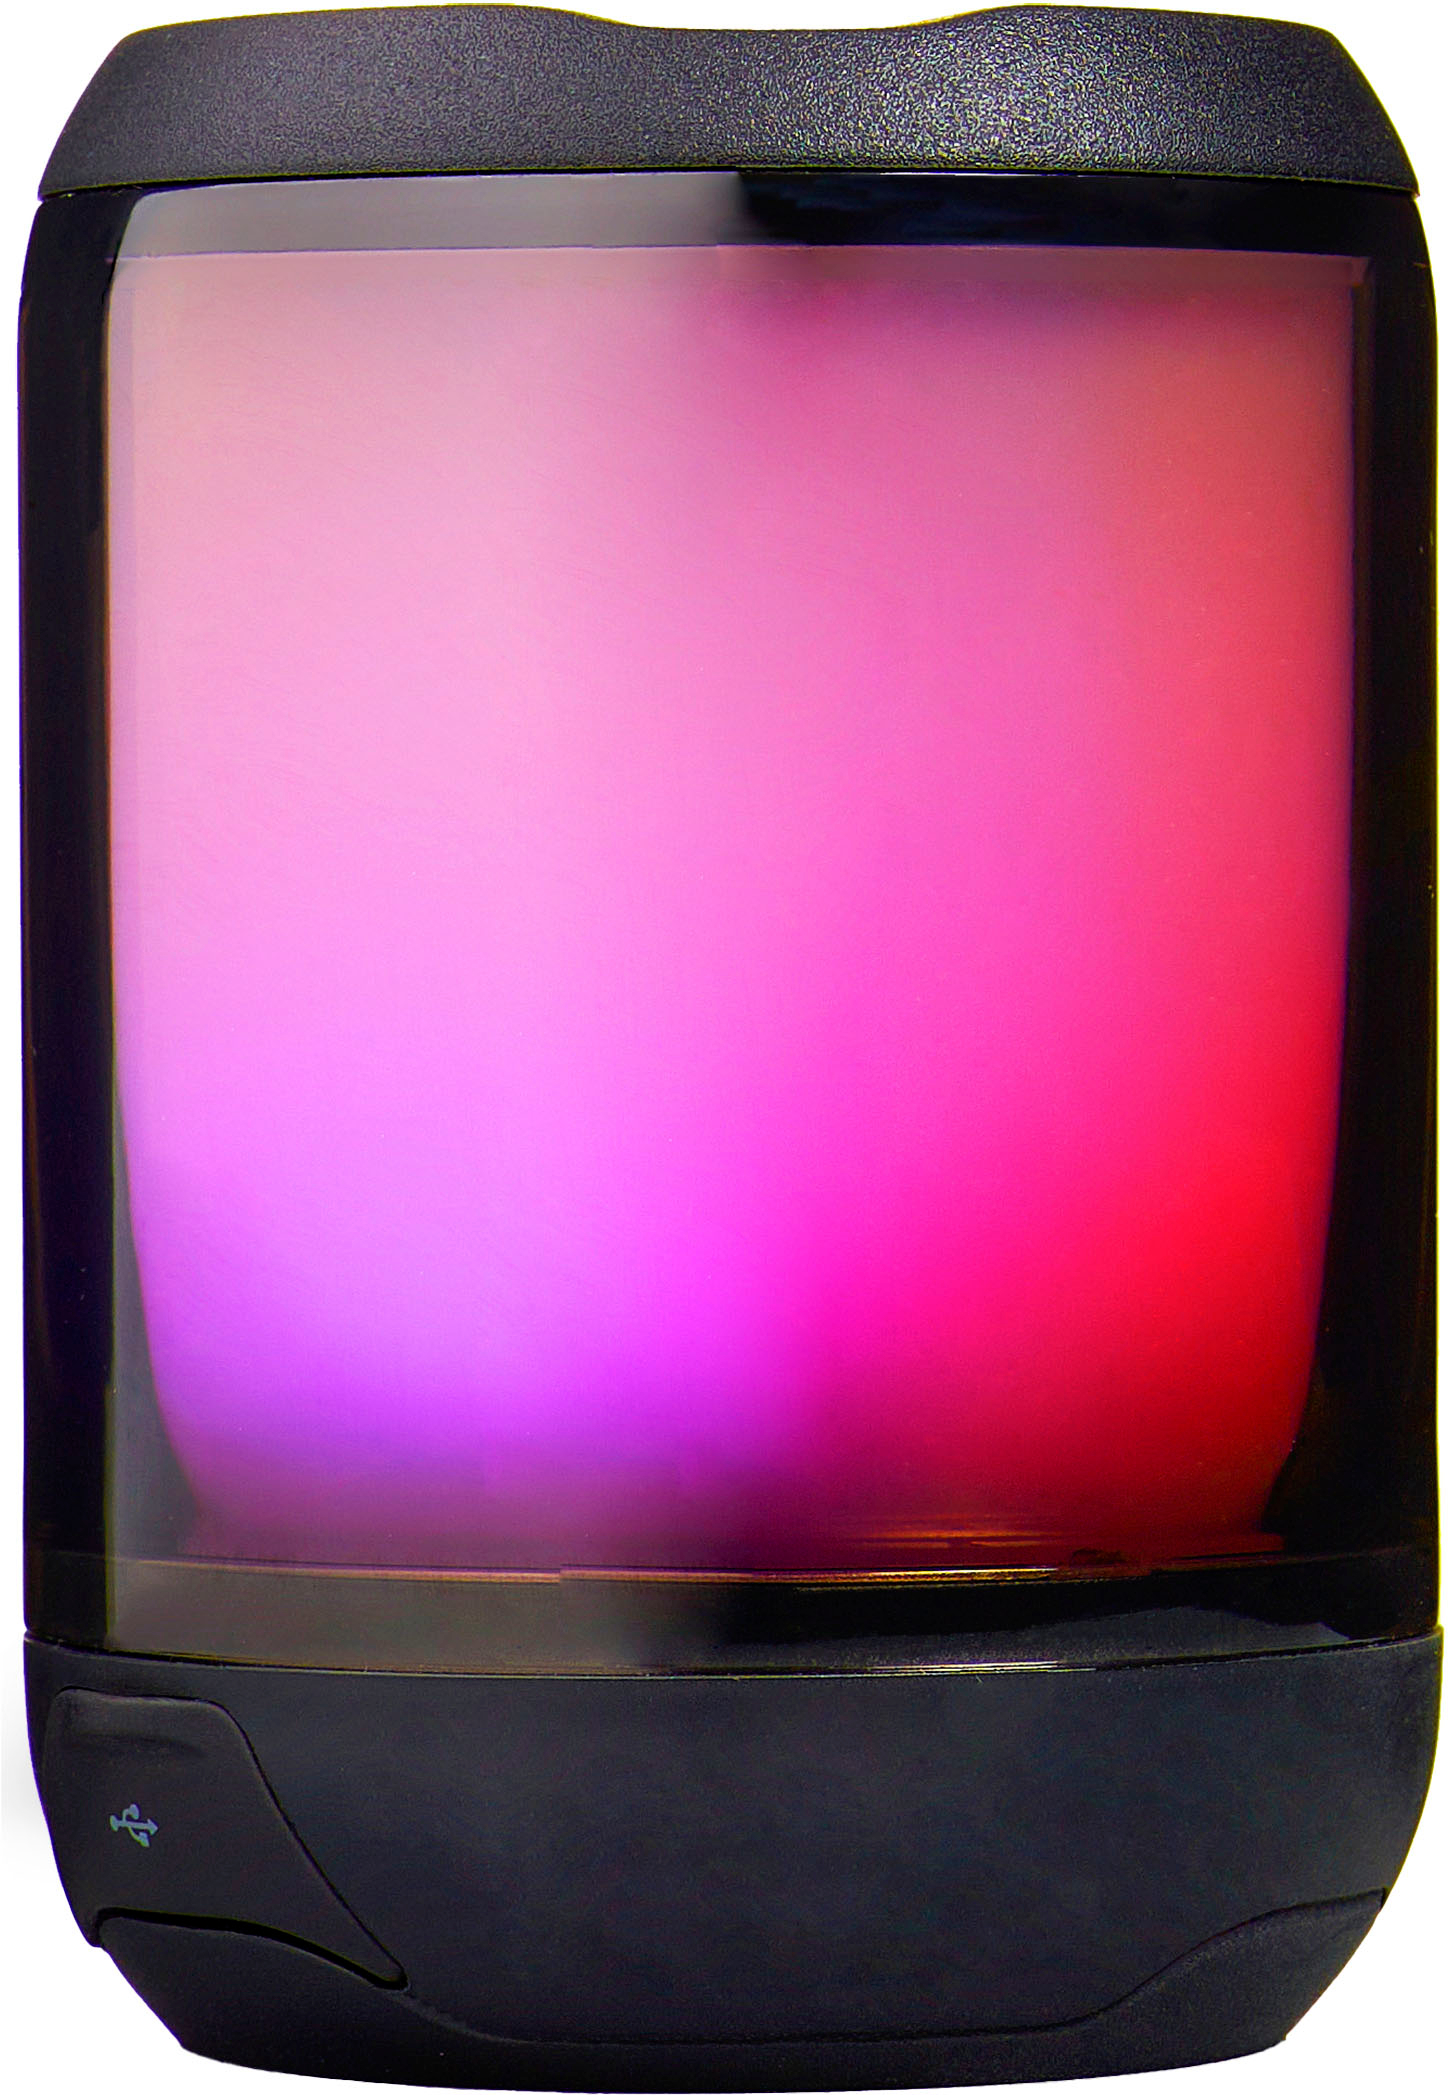 iHome PLAYGLOW MINI (iBT810) Rechargeable Color Changing Bluetooth Speaker